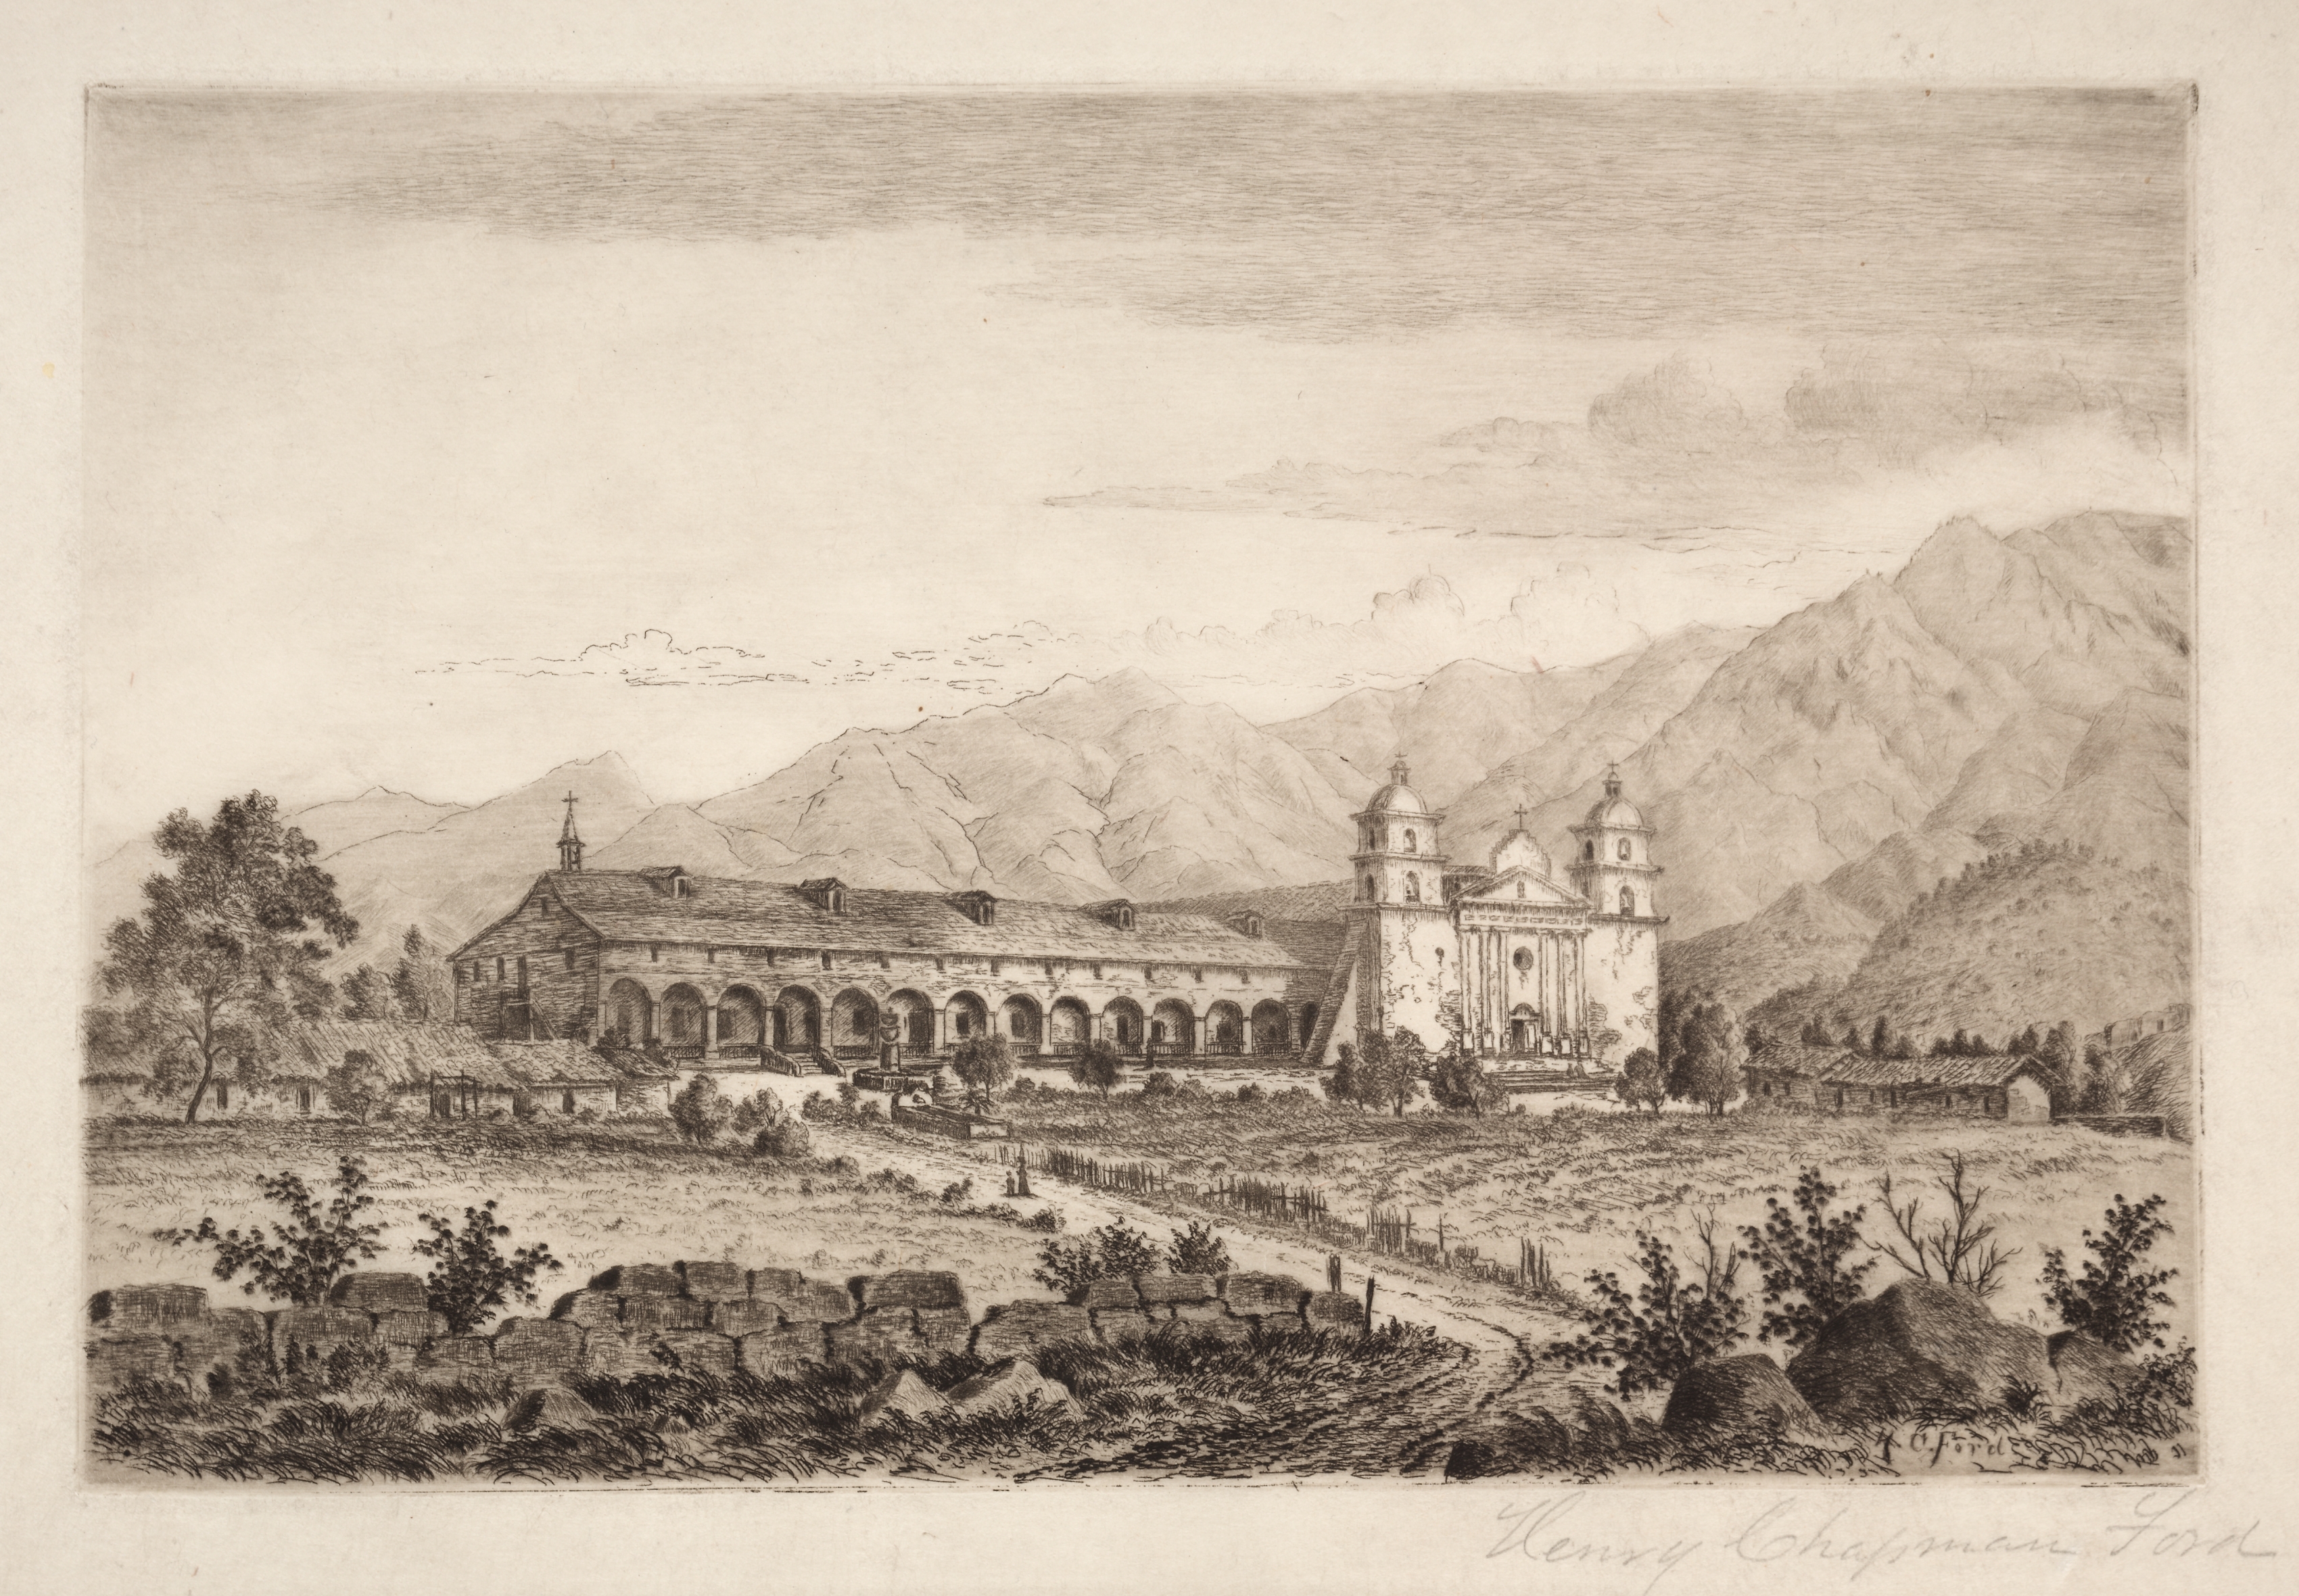 Santa Barbara Mission, from the series, Etchings of the Franciscan Missions of California